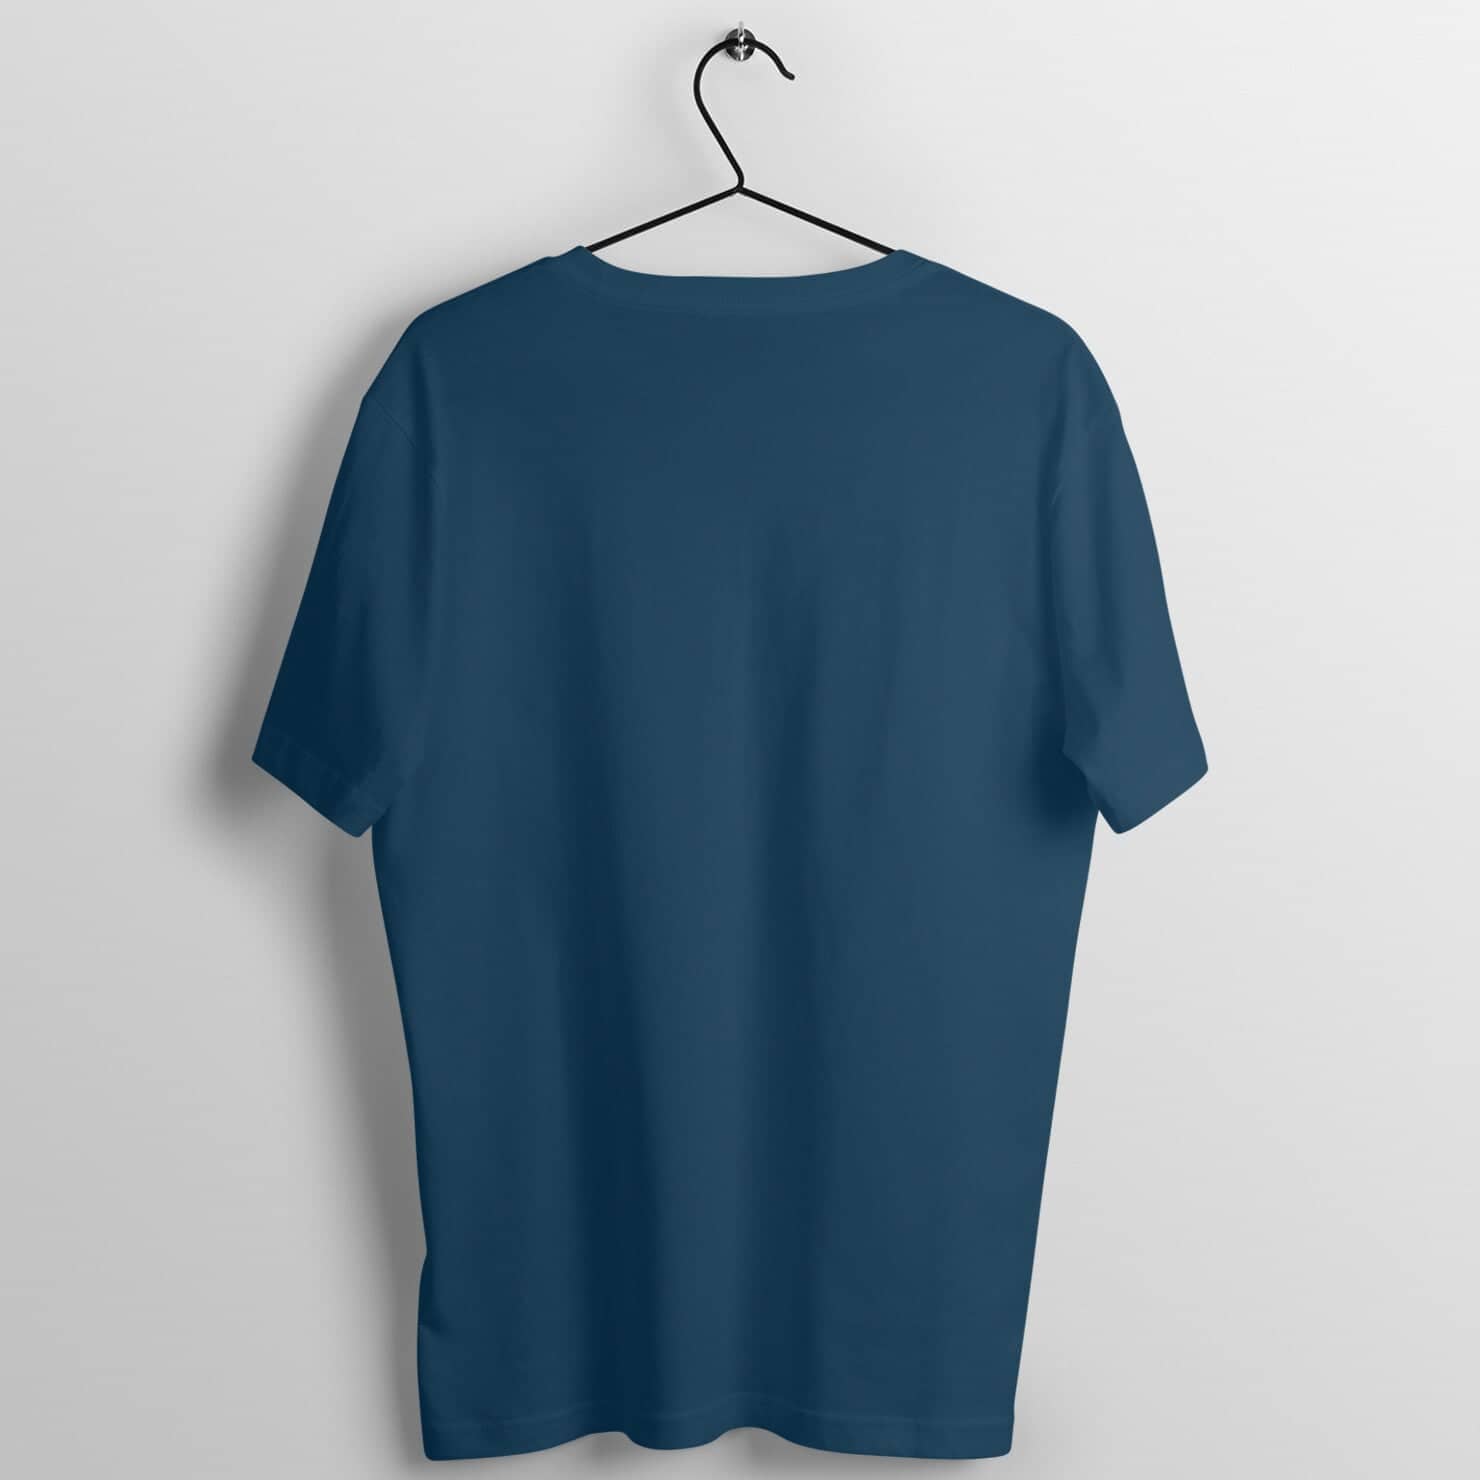 Kal Se Gym Chalu Exclusive Navy Blue T Shirt for Men and Women freeshipping - Catch My Drift India